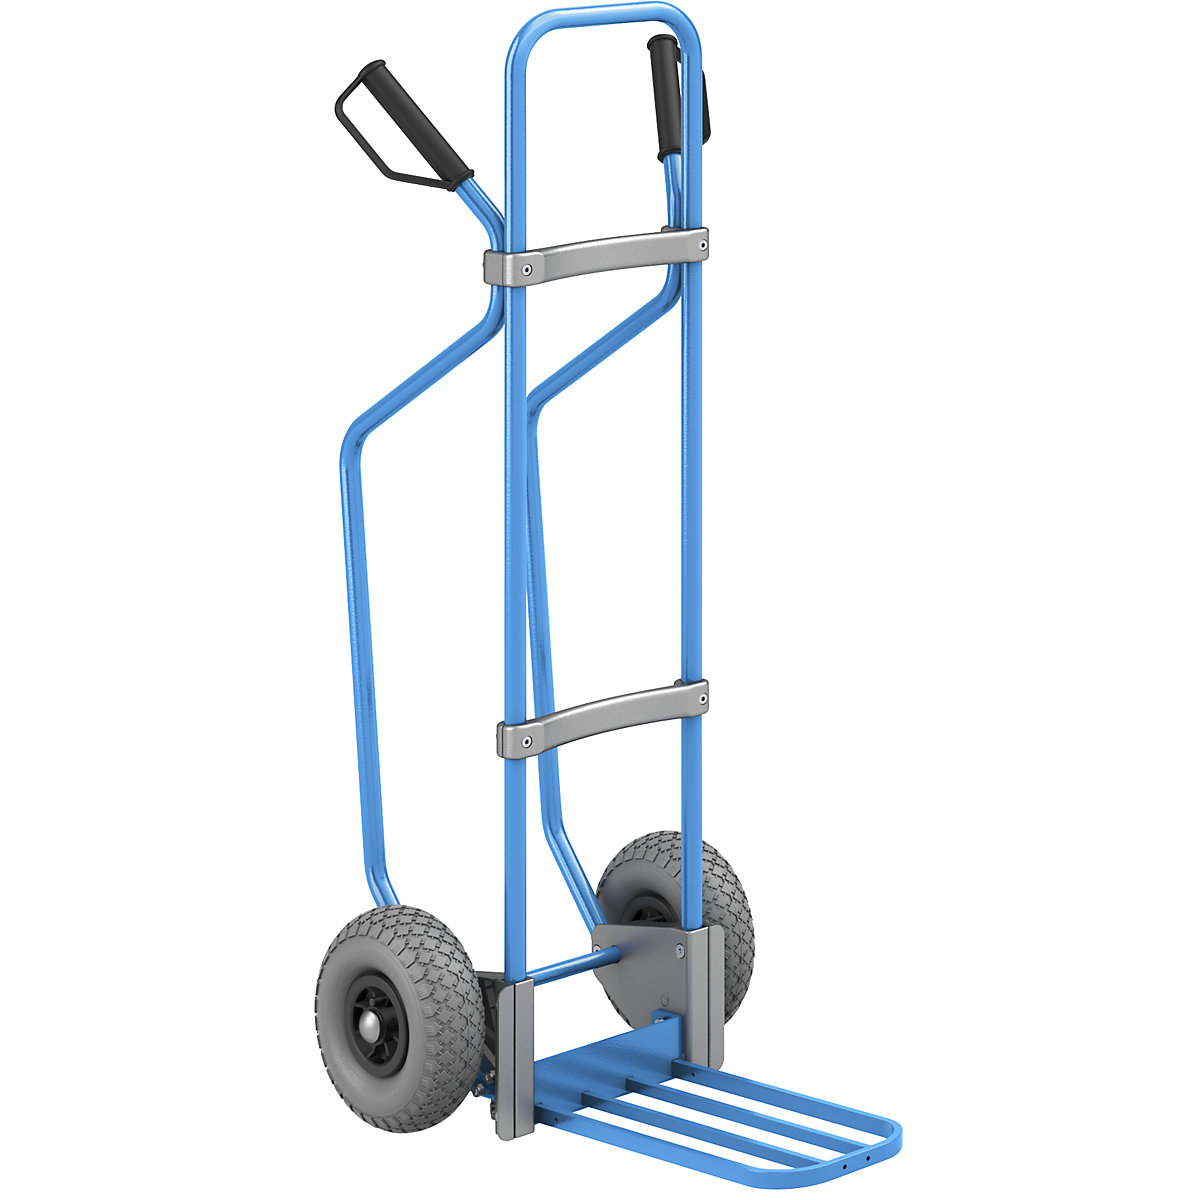 Sack truck with runners, blue – eurokraft pro, parcel footplate WxD 430 x 250 mm, blue, PU tyres, 2+ items-1